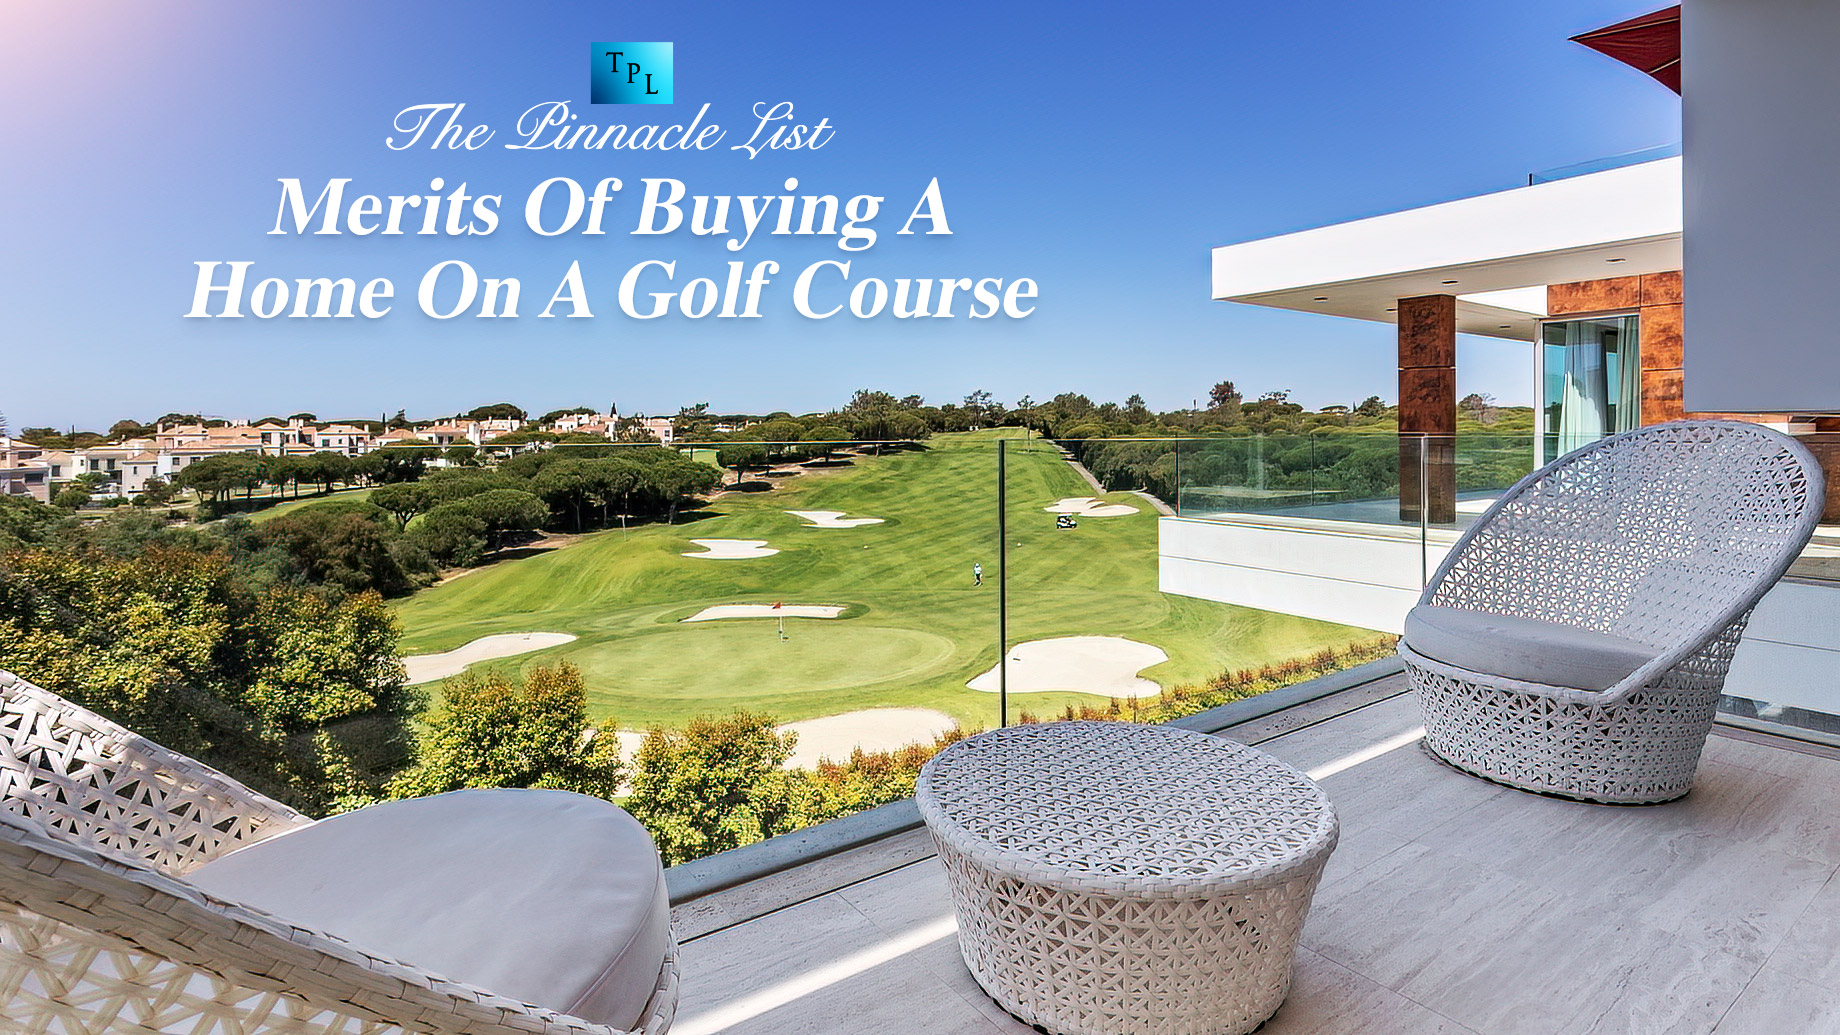 Merits Of Buying A Home On A Golf Course